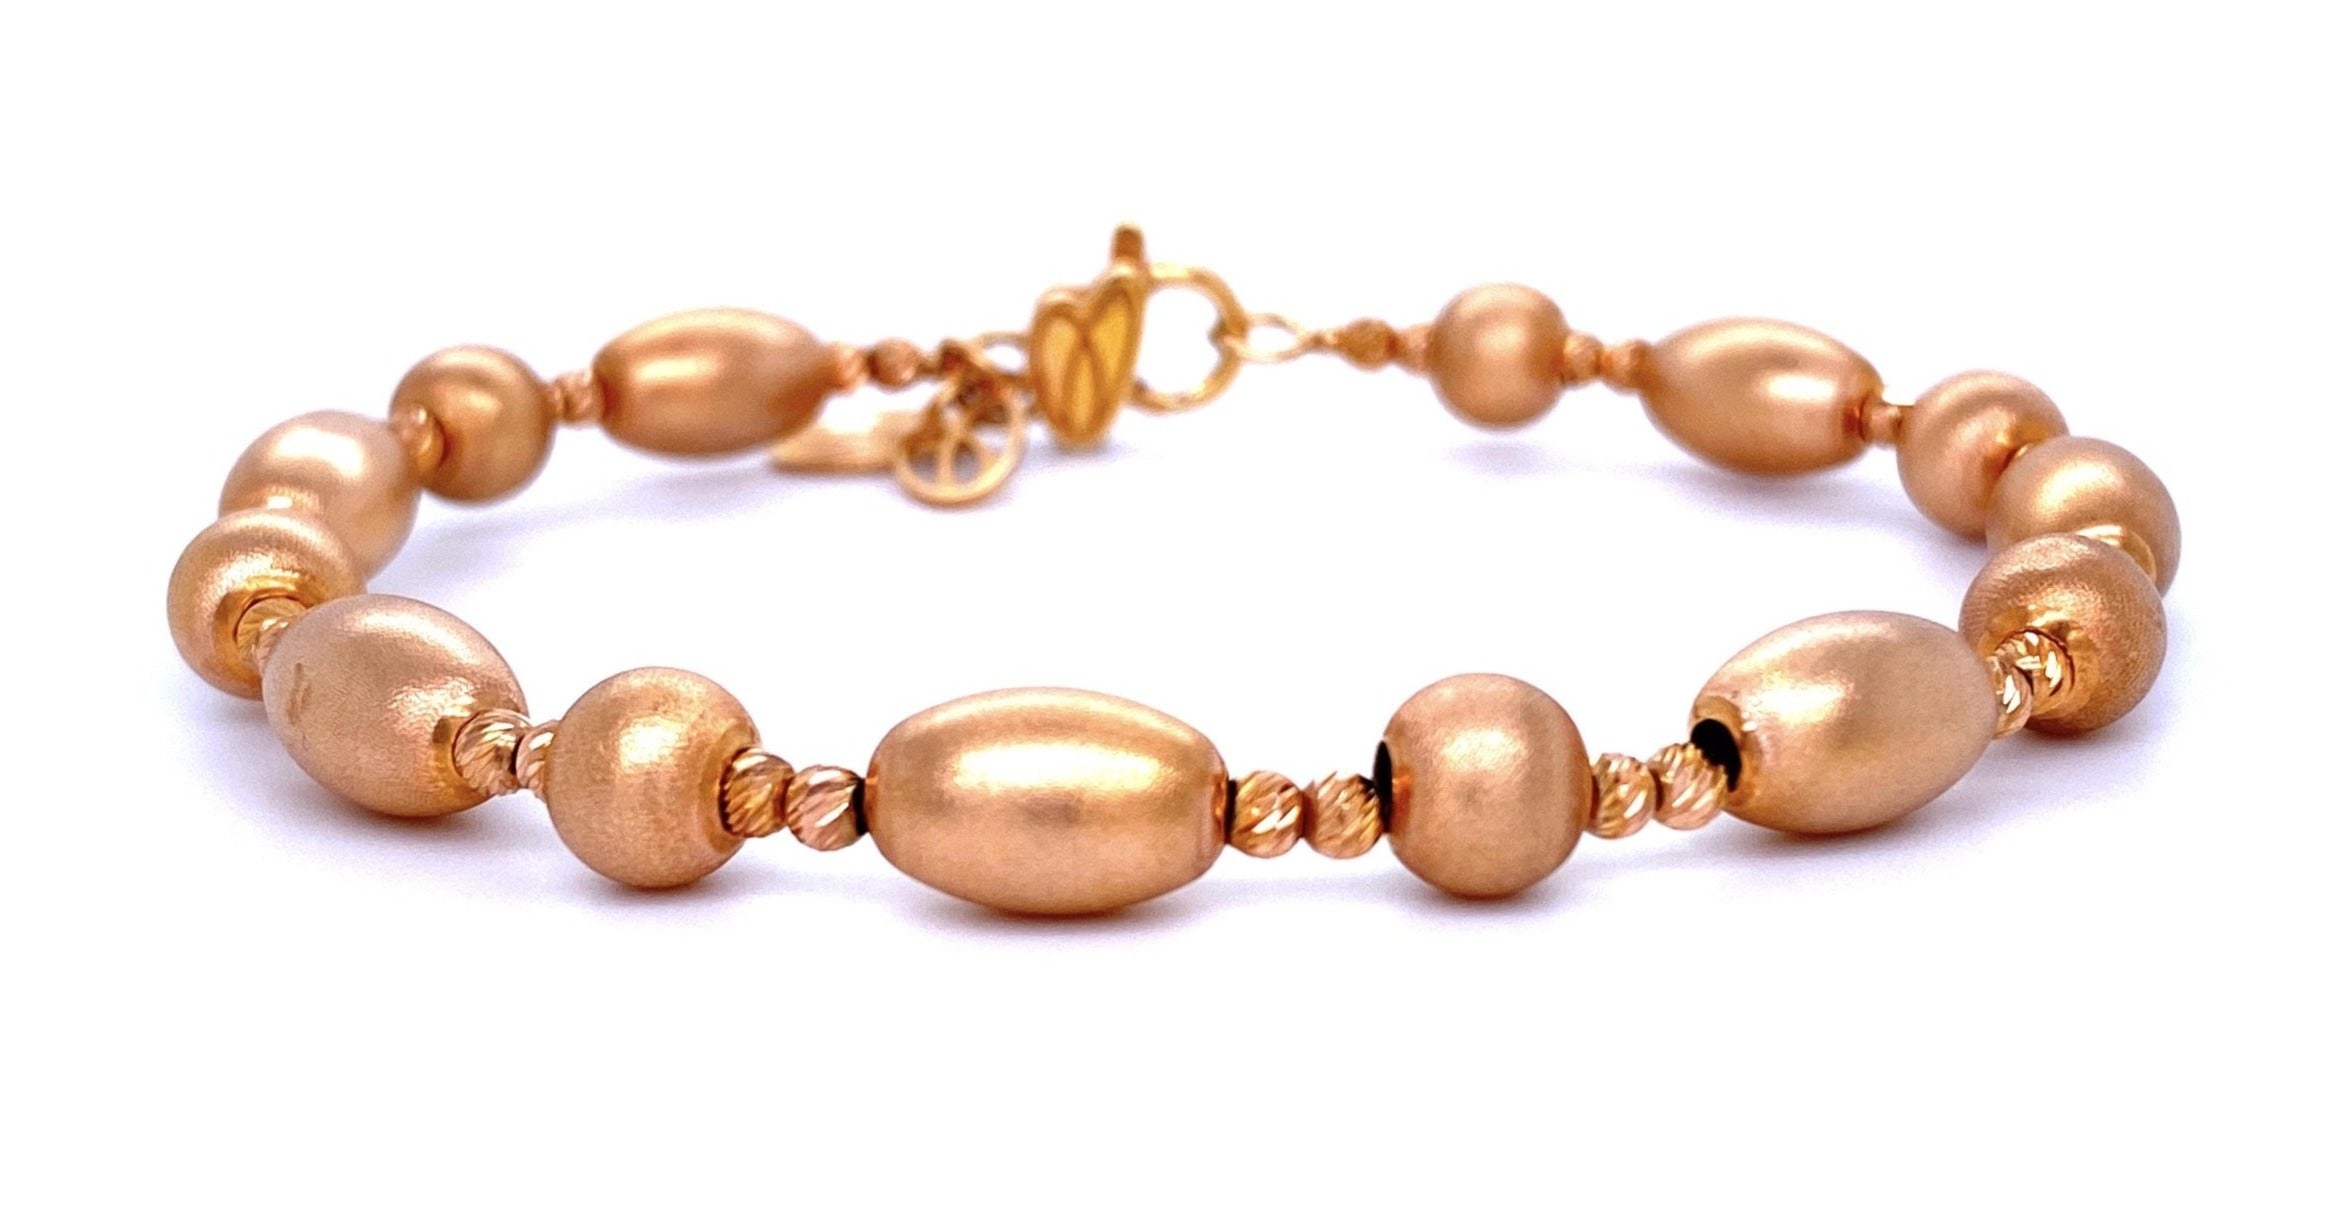 Bead Bangle 14k rose gold  Matte finish  Secure lobster clasp  6.5" circumference 